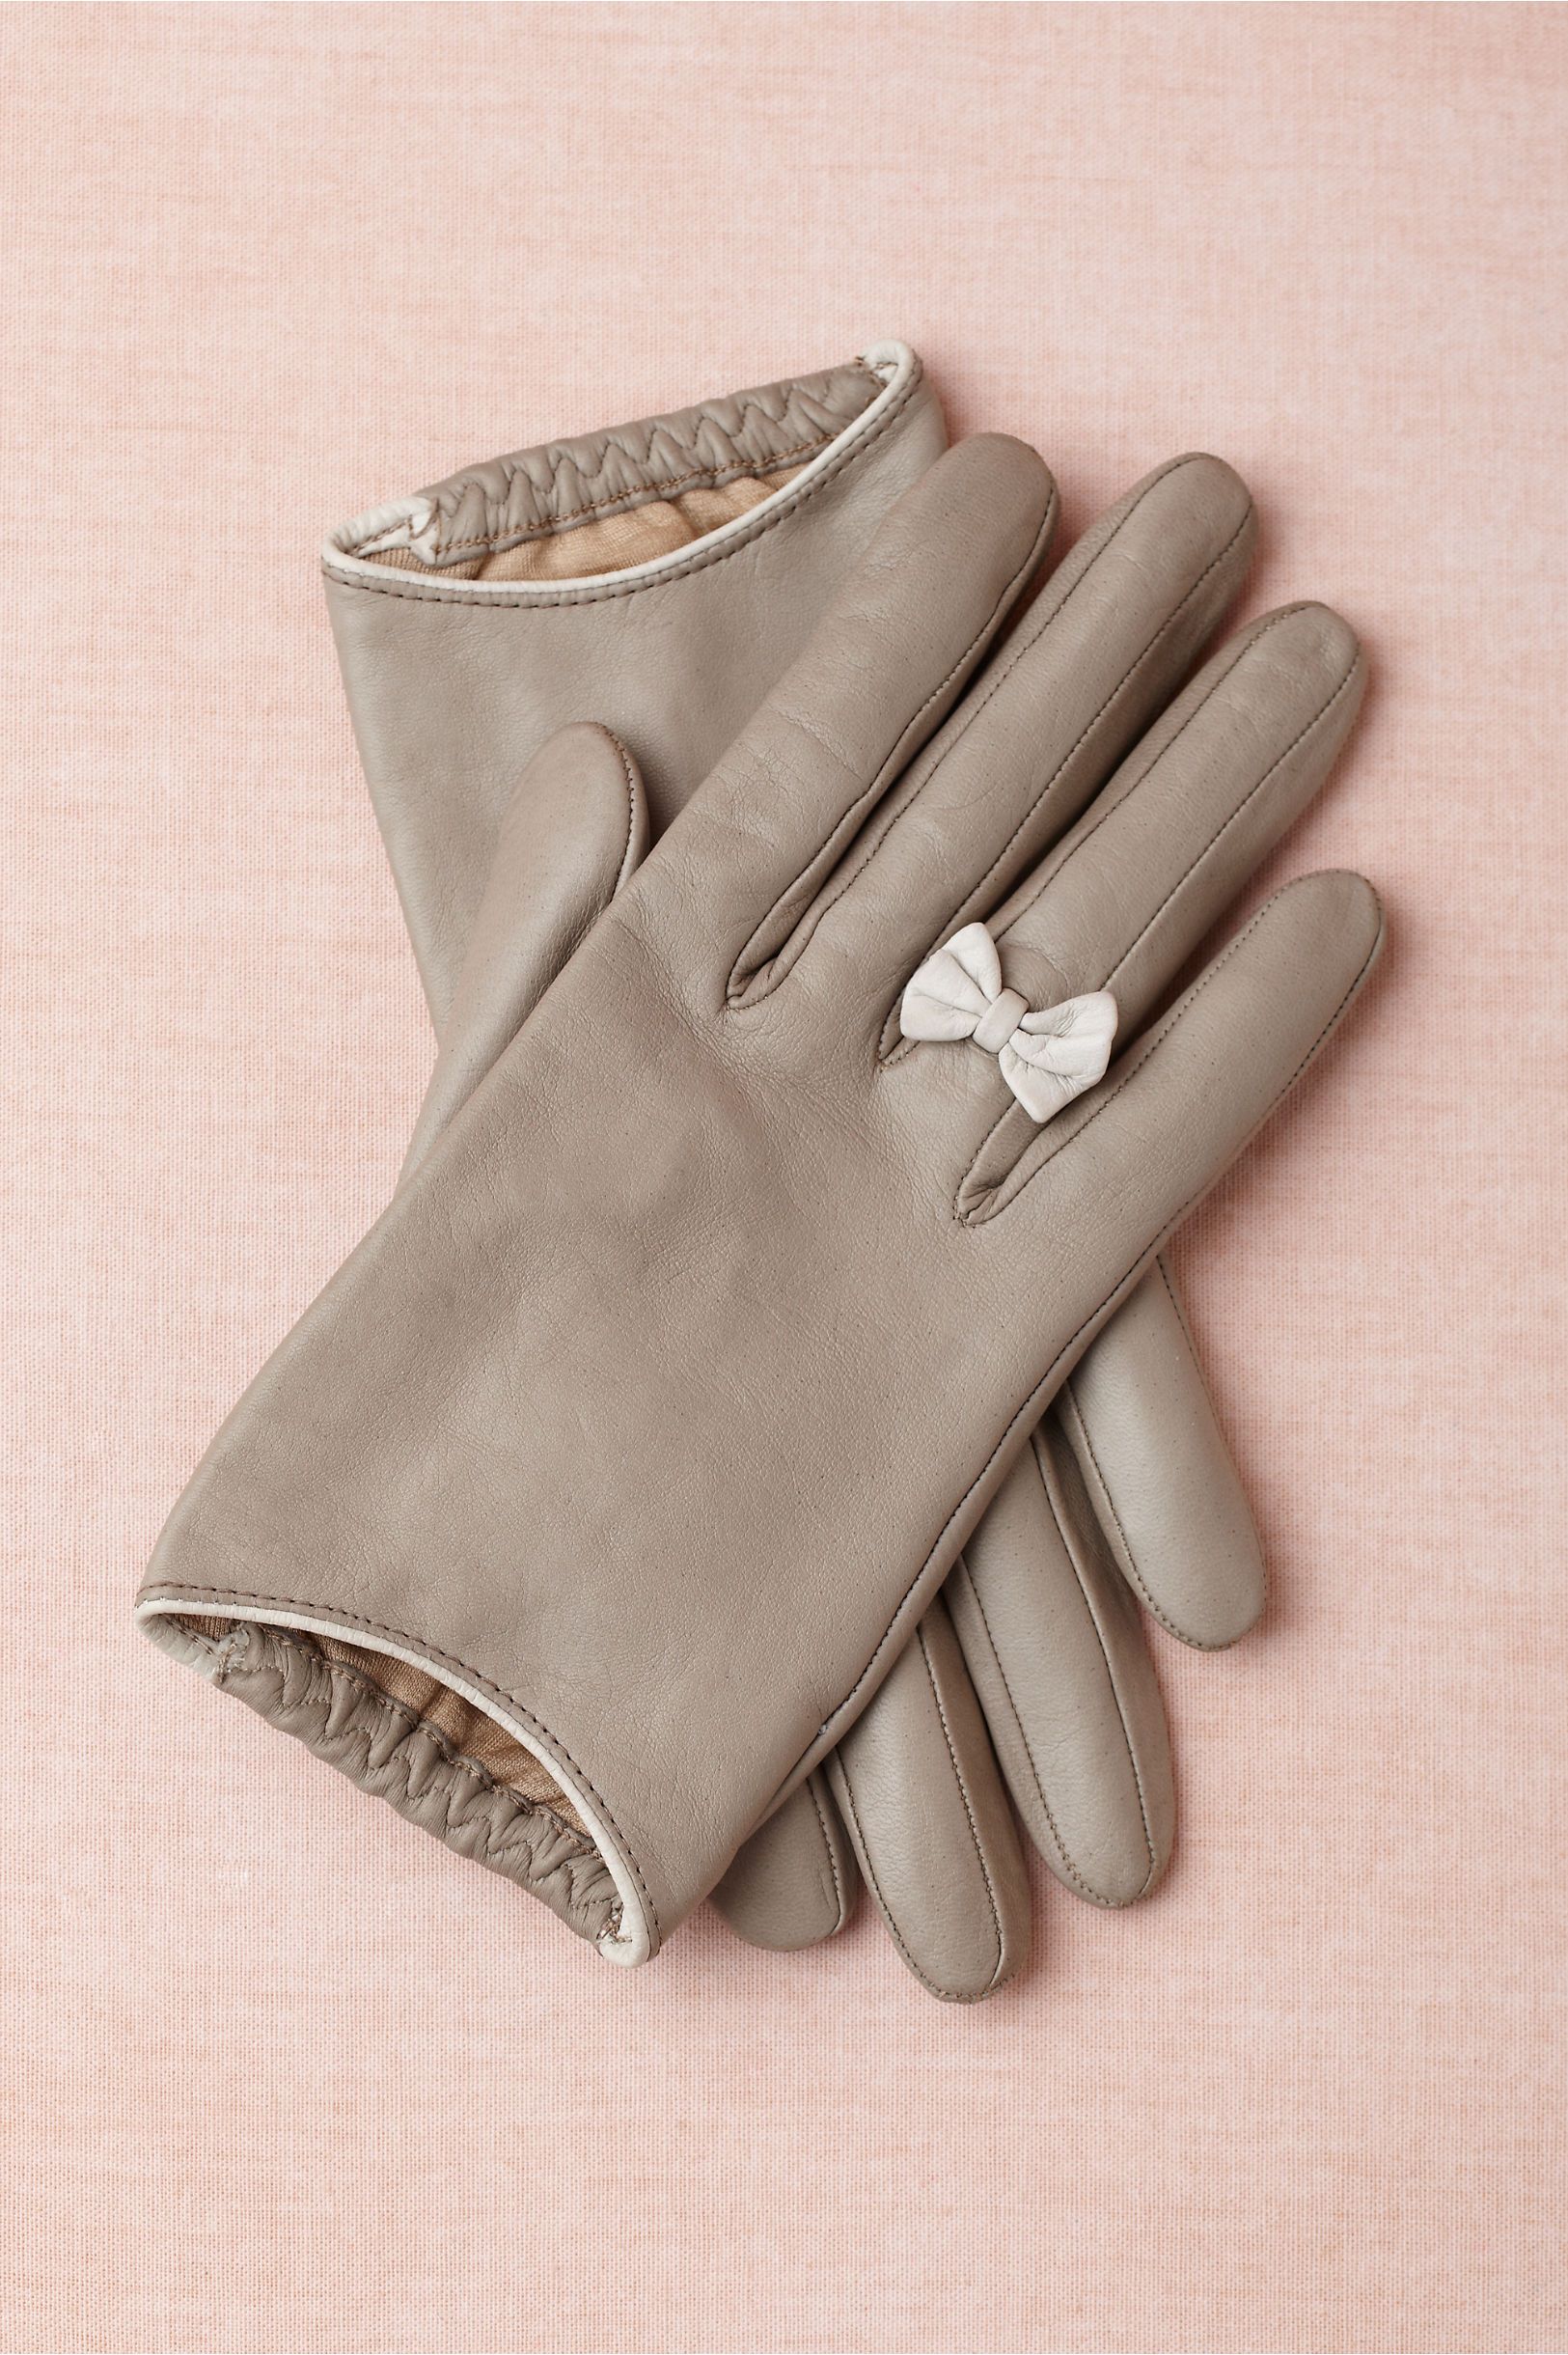 Cutest gloves I've ever seen. I want!